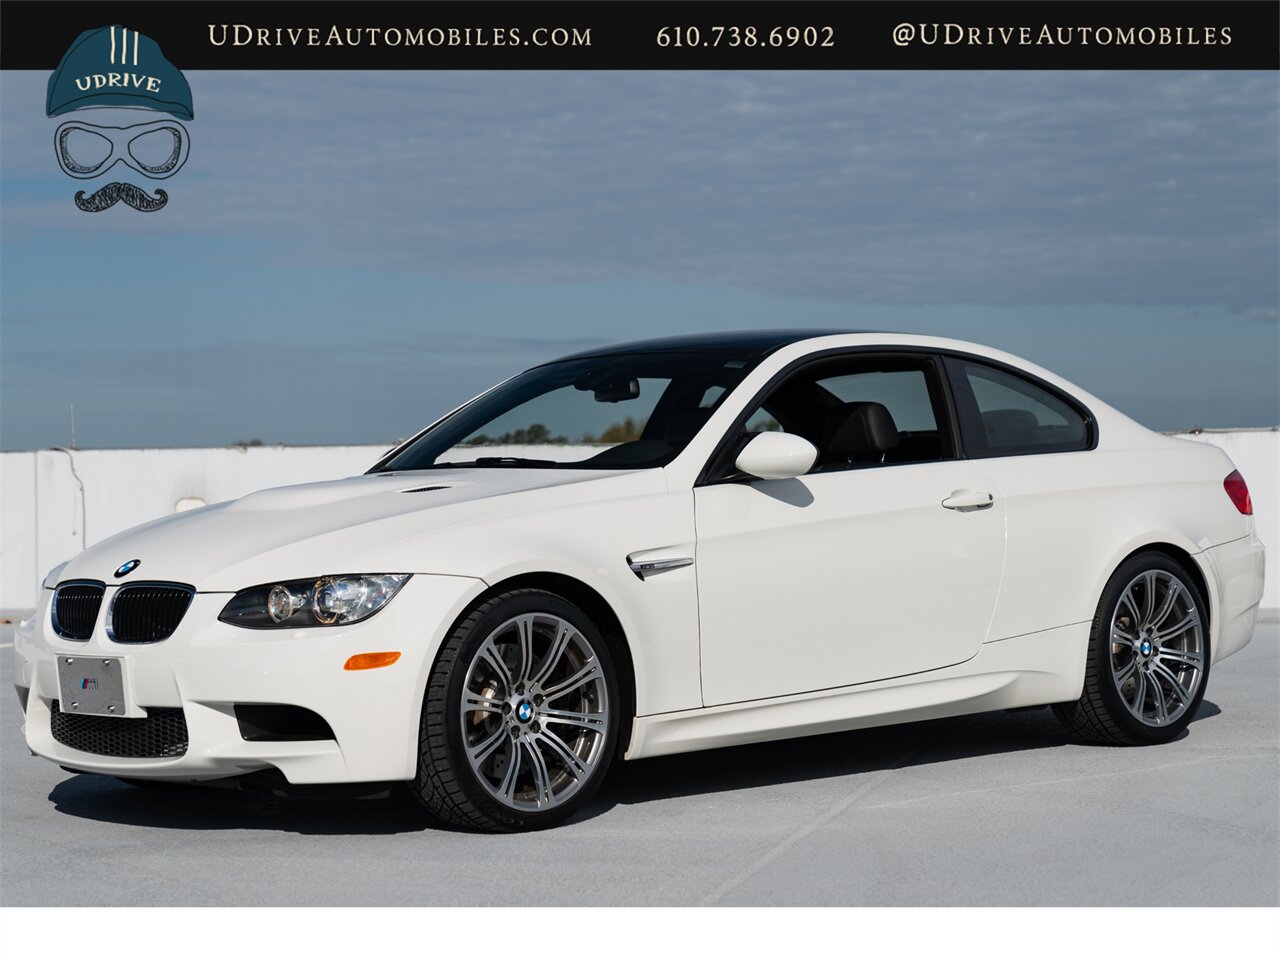 2011 BMW M3  No Nav Carbon Roof Comf Acc 19in Whls 11k Miles - Photo 12 - West Chester, PA 19382